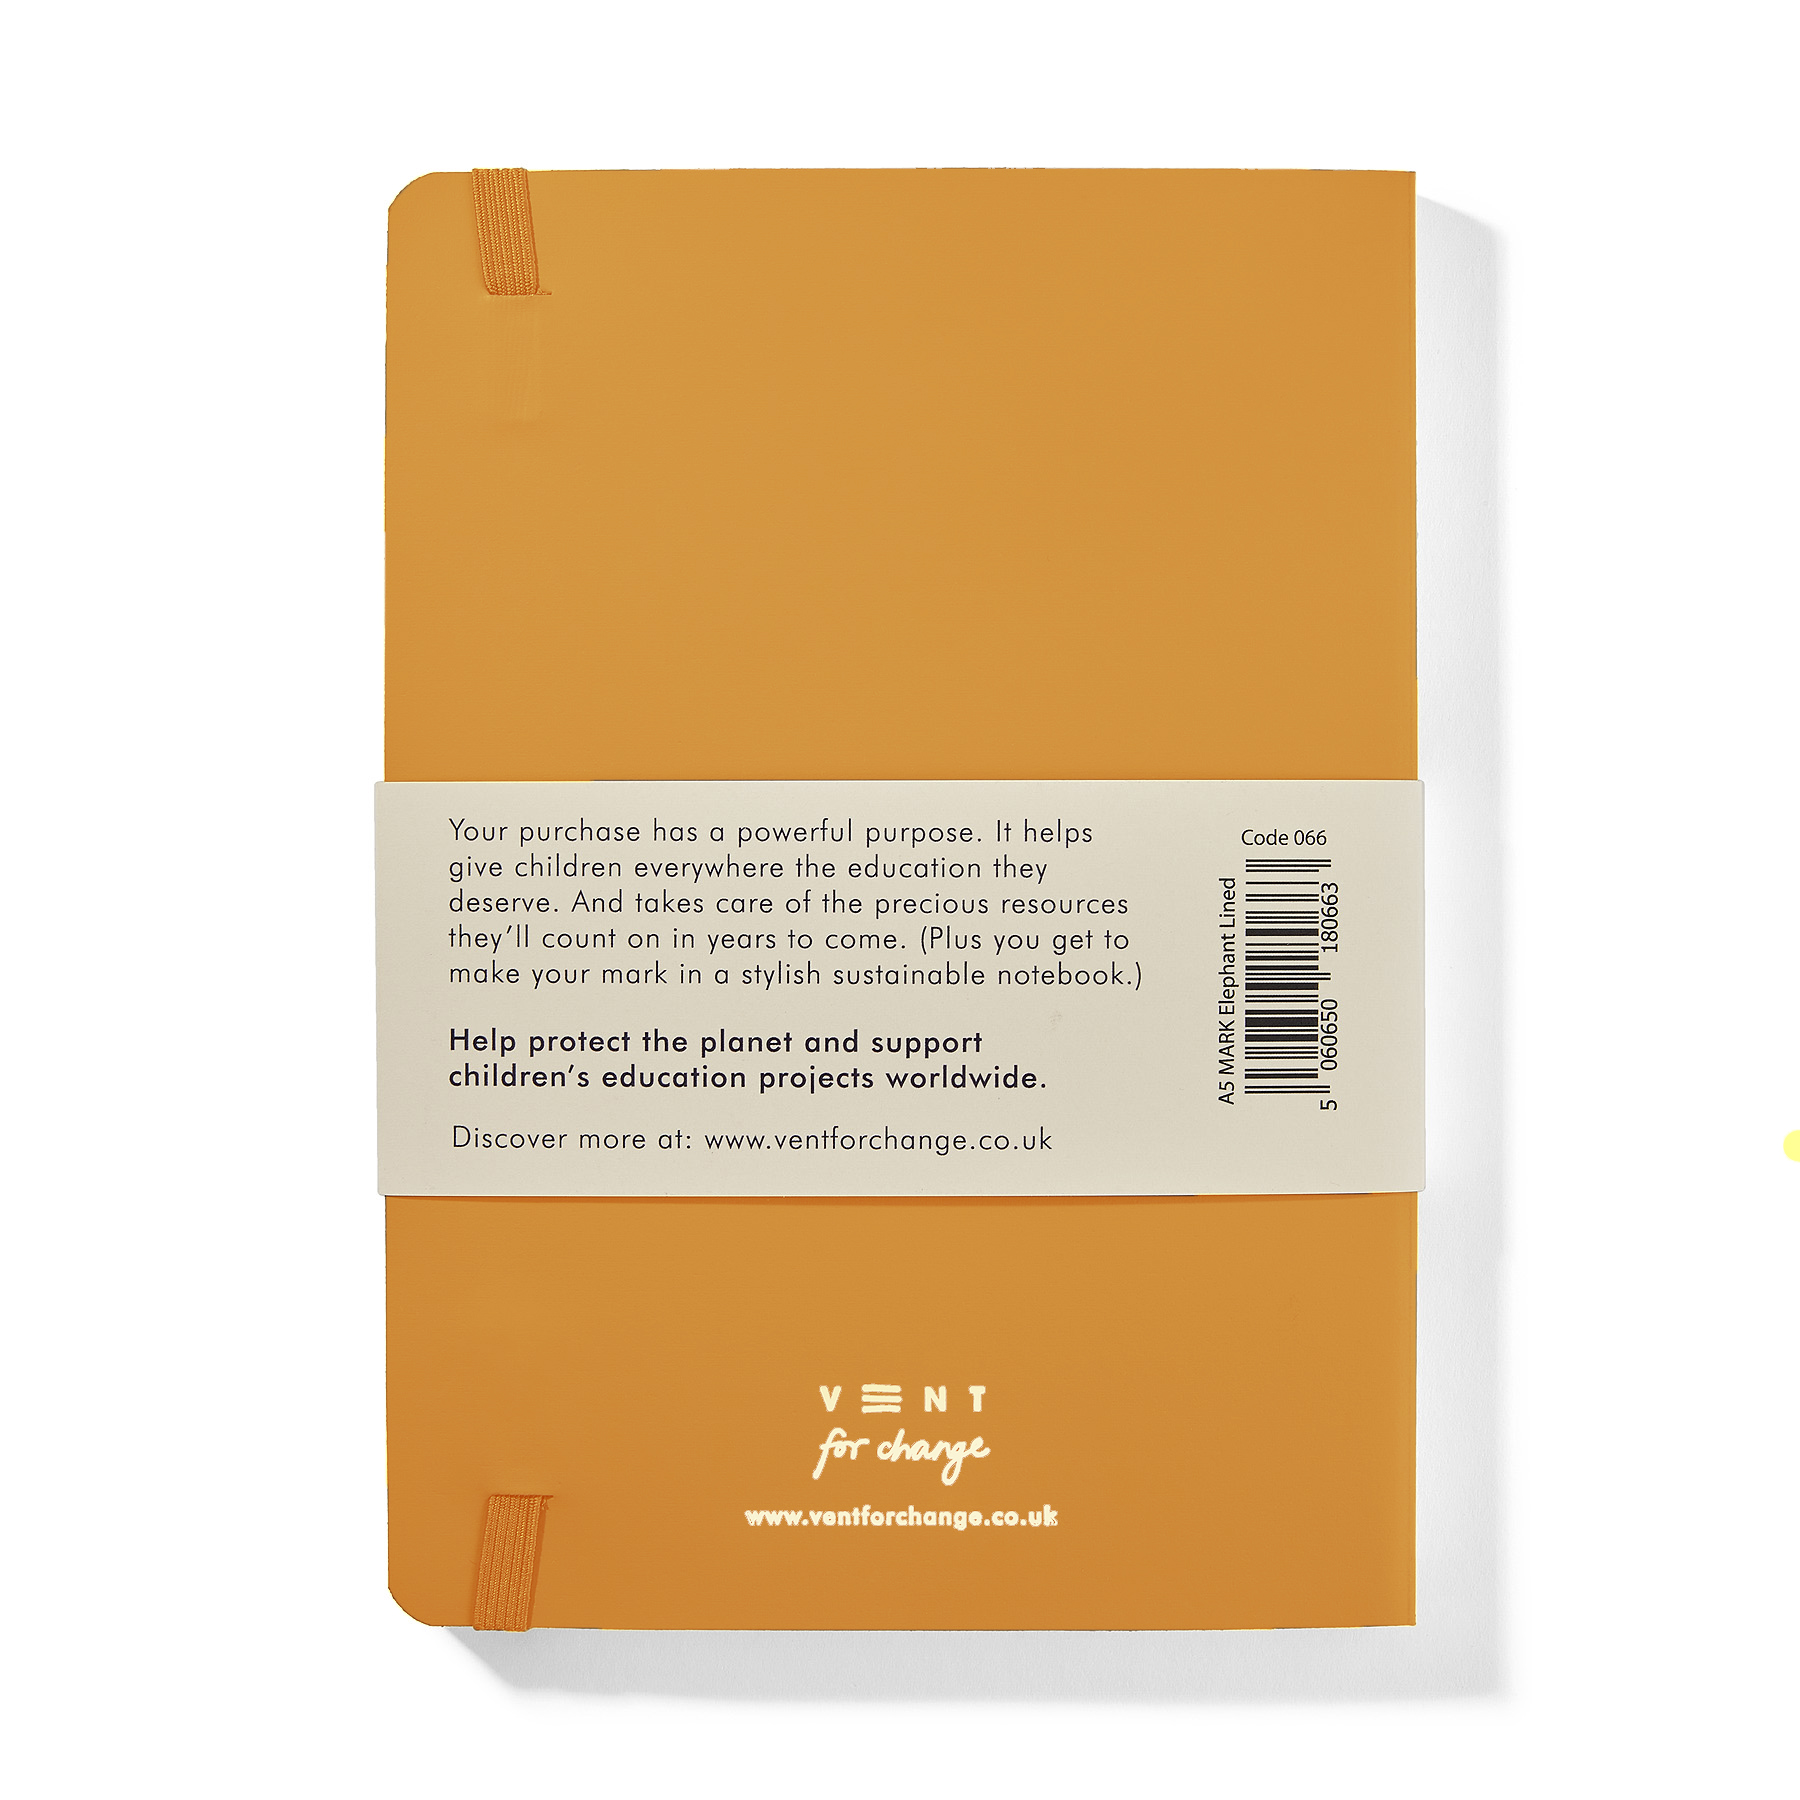 Recycled Leather A5 Lined Notebook - Mustard Yellow